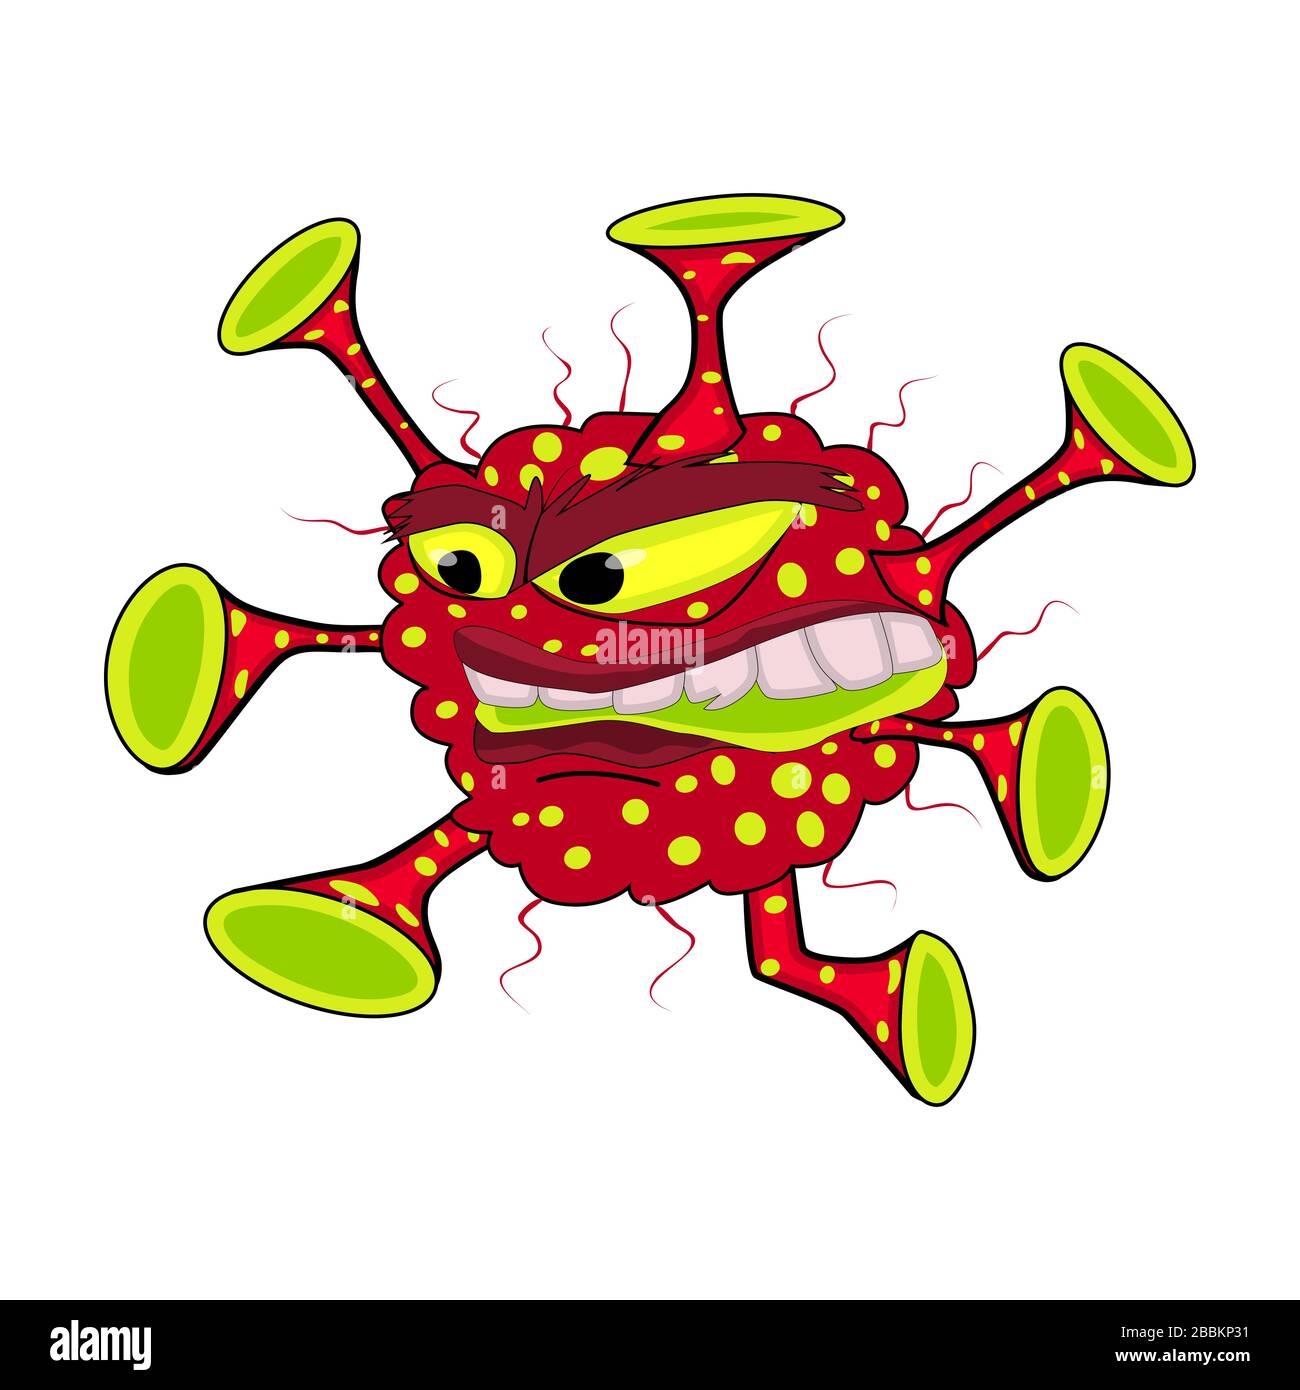 Funny micro virus isolated on white background. Cartoon bad bacteria monster character with facial expression. Germ, monster or parasite. Stock vector Stock Vector